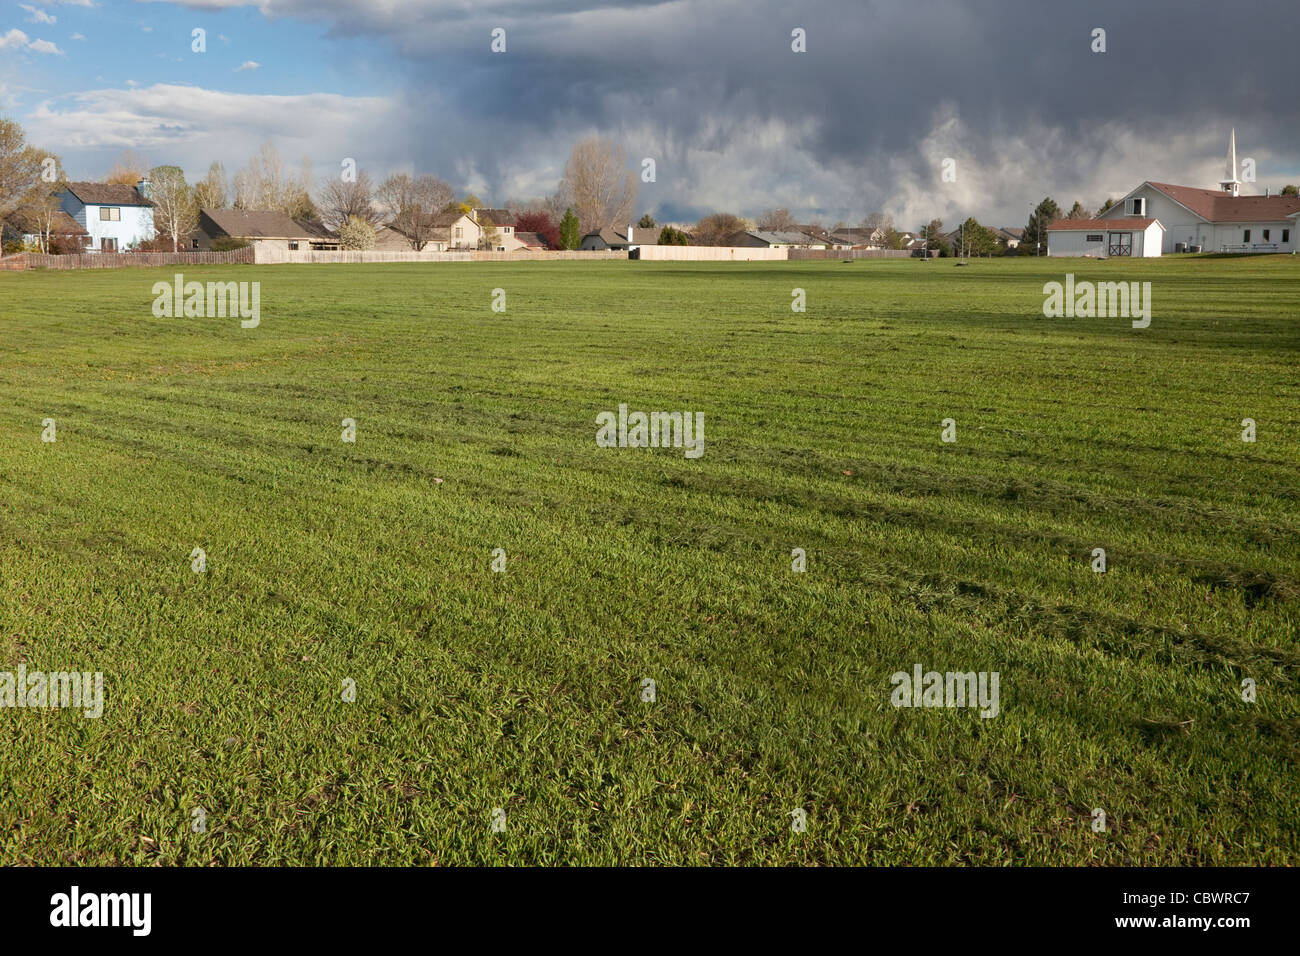 freshly mowed, large field of grass with residential homes, church and heavy storm clouds in background Stock Photo